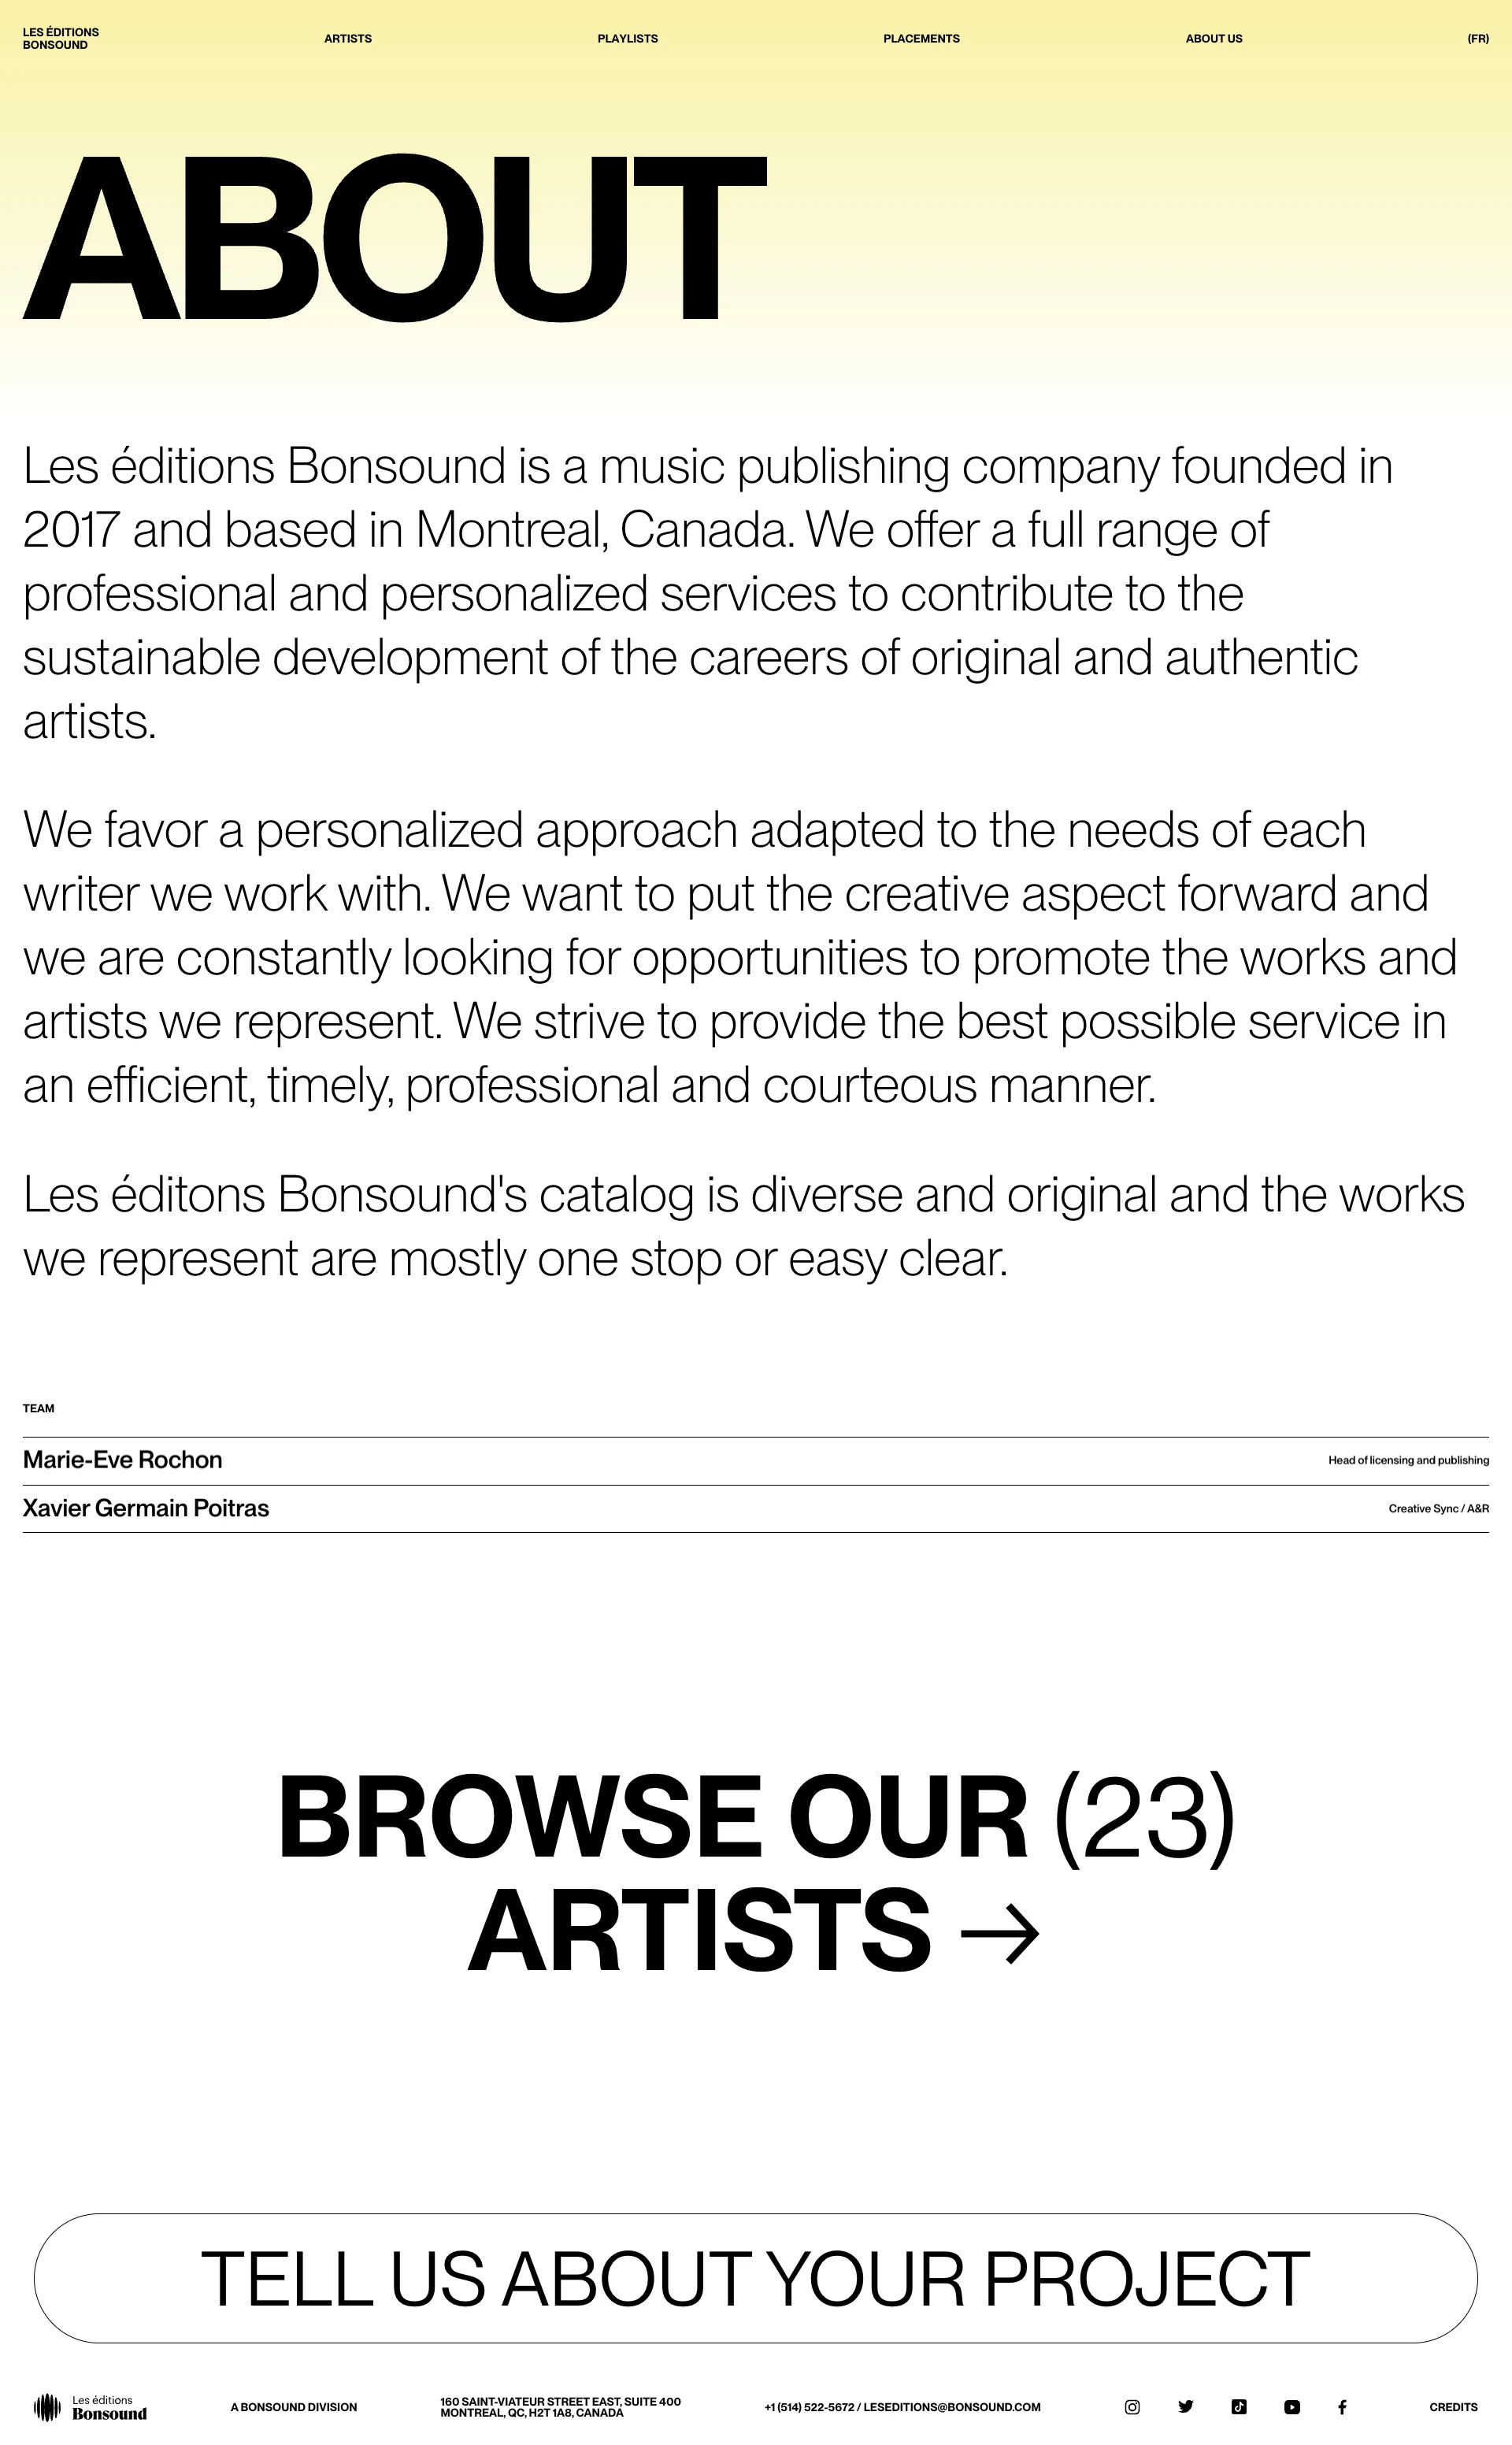 Les éditions Bonsound Landing Page Example: Les éditions Bonsound is a music publishing company founded in 2017 and based in Montreal, Canada. We offer a full range of professional and personalized services to contribute to the sustainable development of the careers of original and authentic artists.